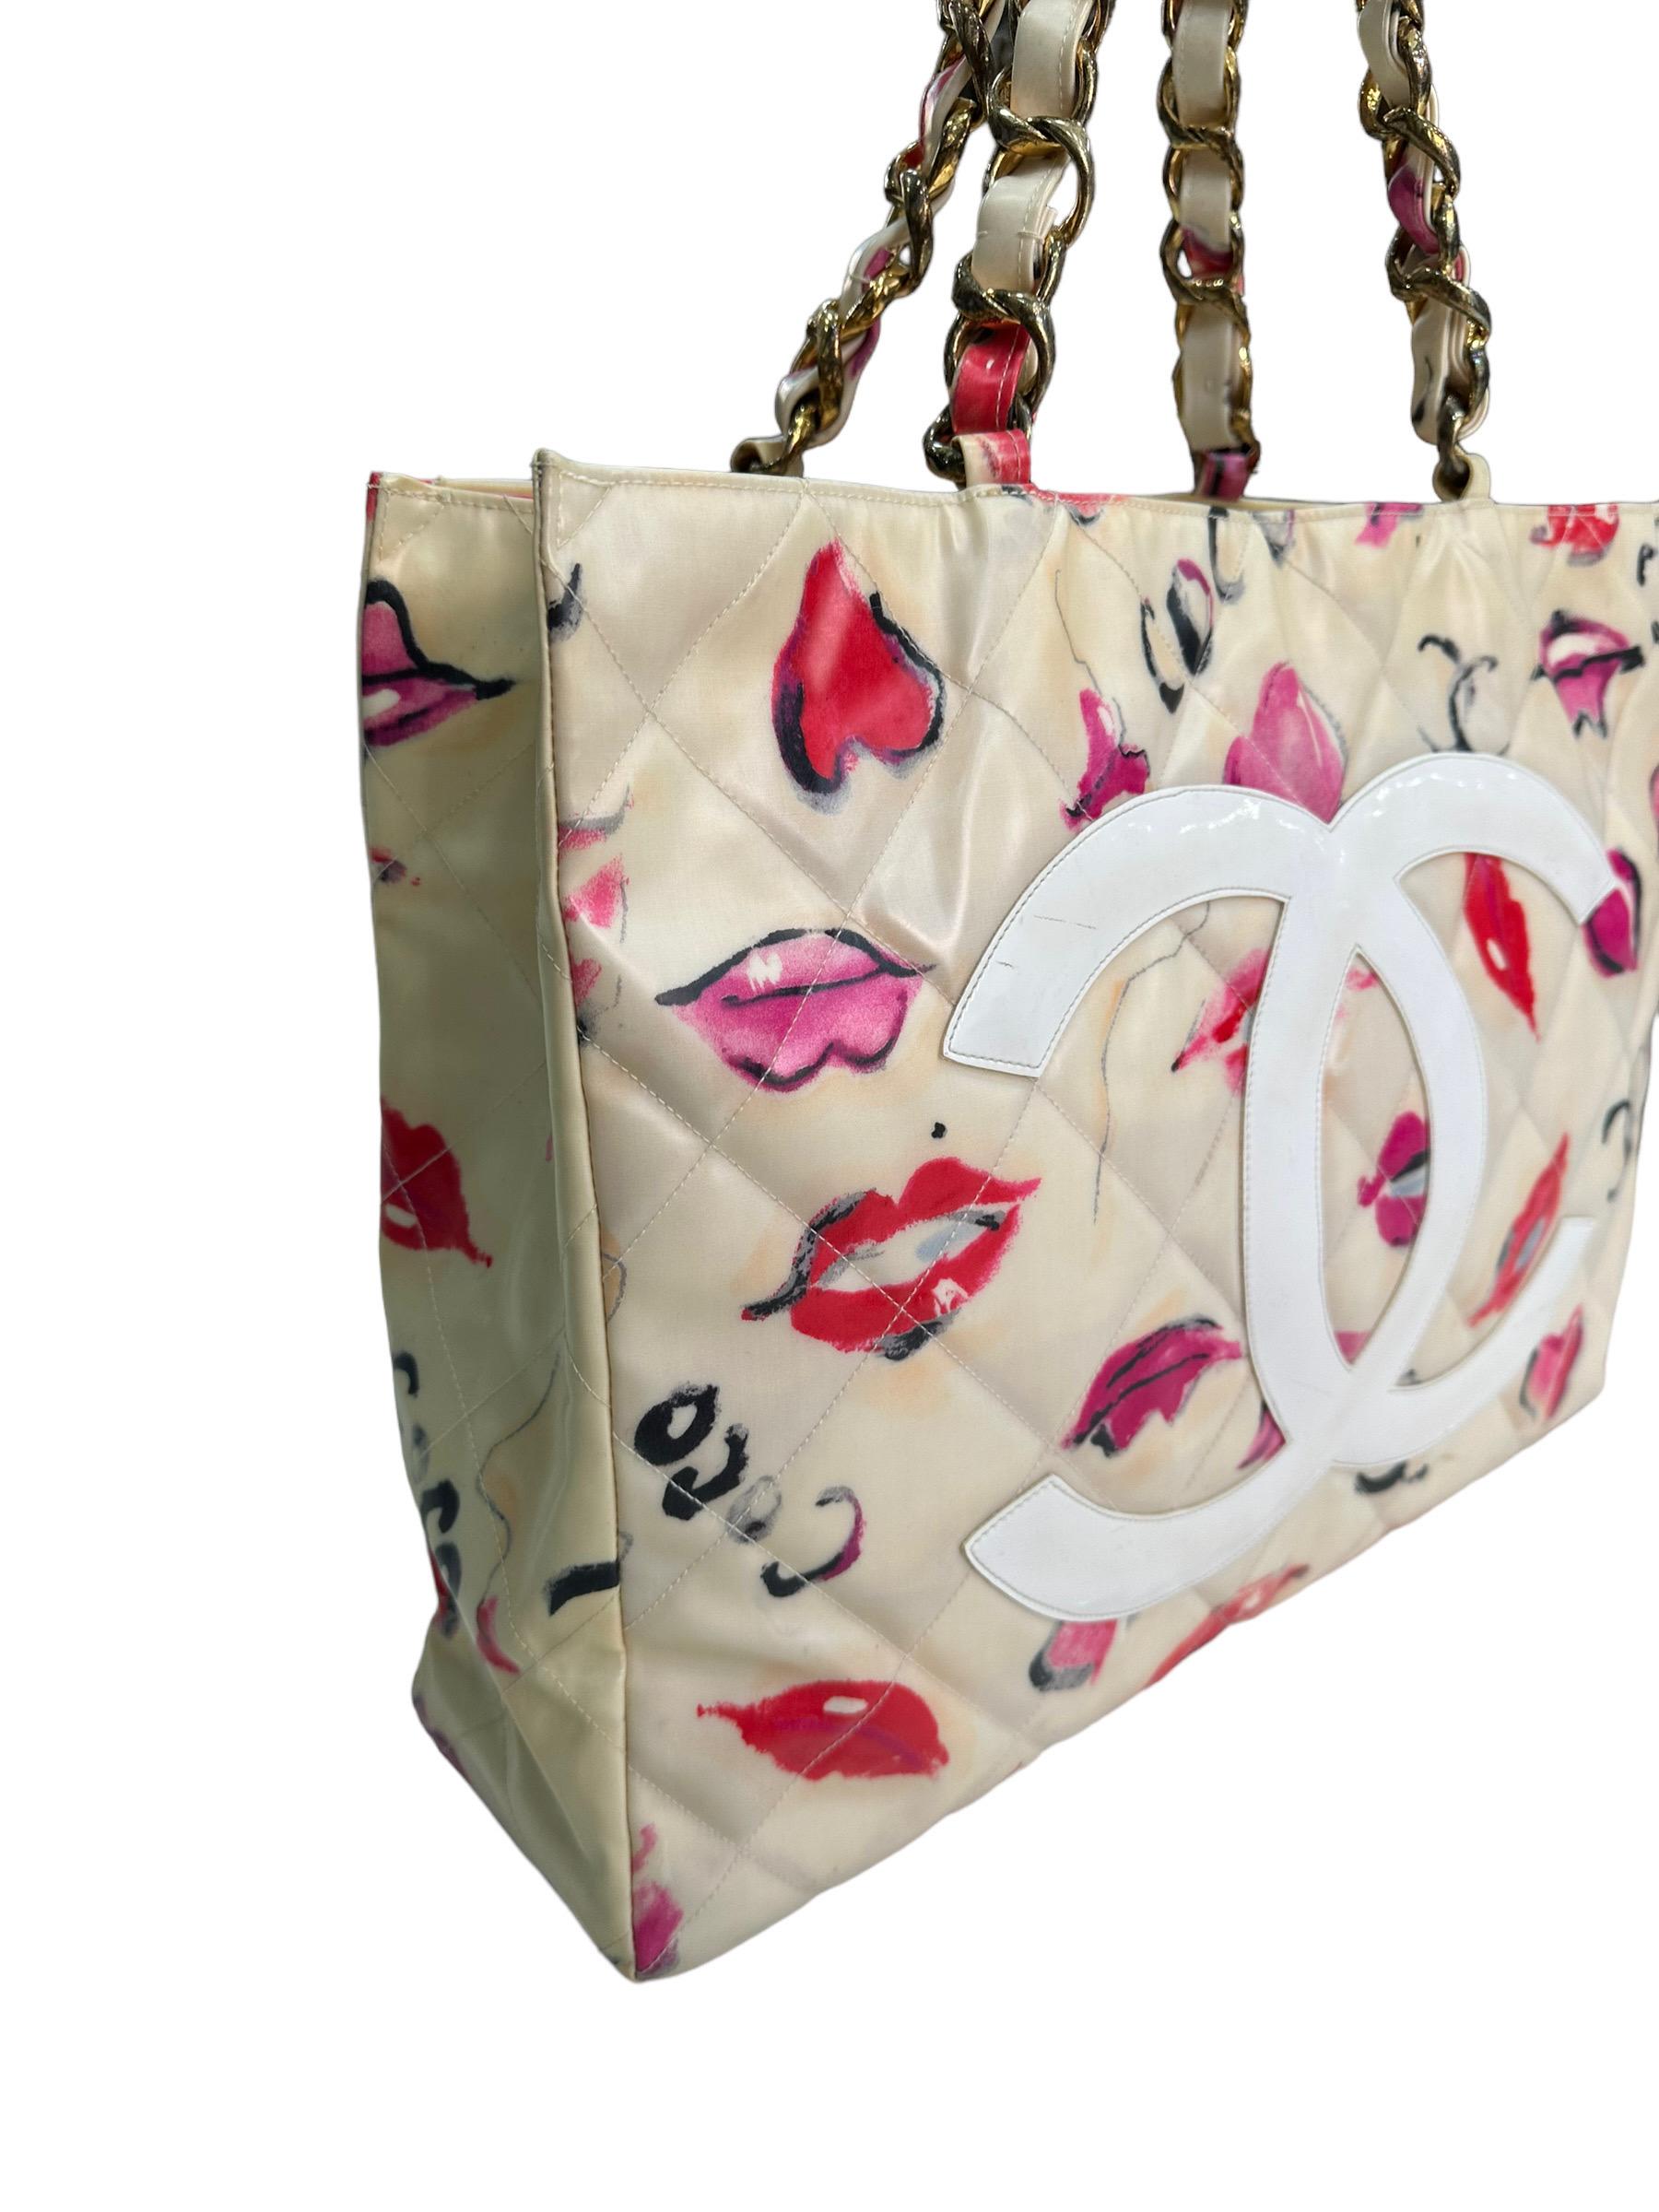 Chanel signed bag, Tote model, Kisses & Lips limited edition, made of cream-colored plastic-coated canvas with pink decorations and golden hardware. It is not equipped with any type of closure, internally covered in white canvas, very roomy.